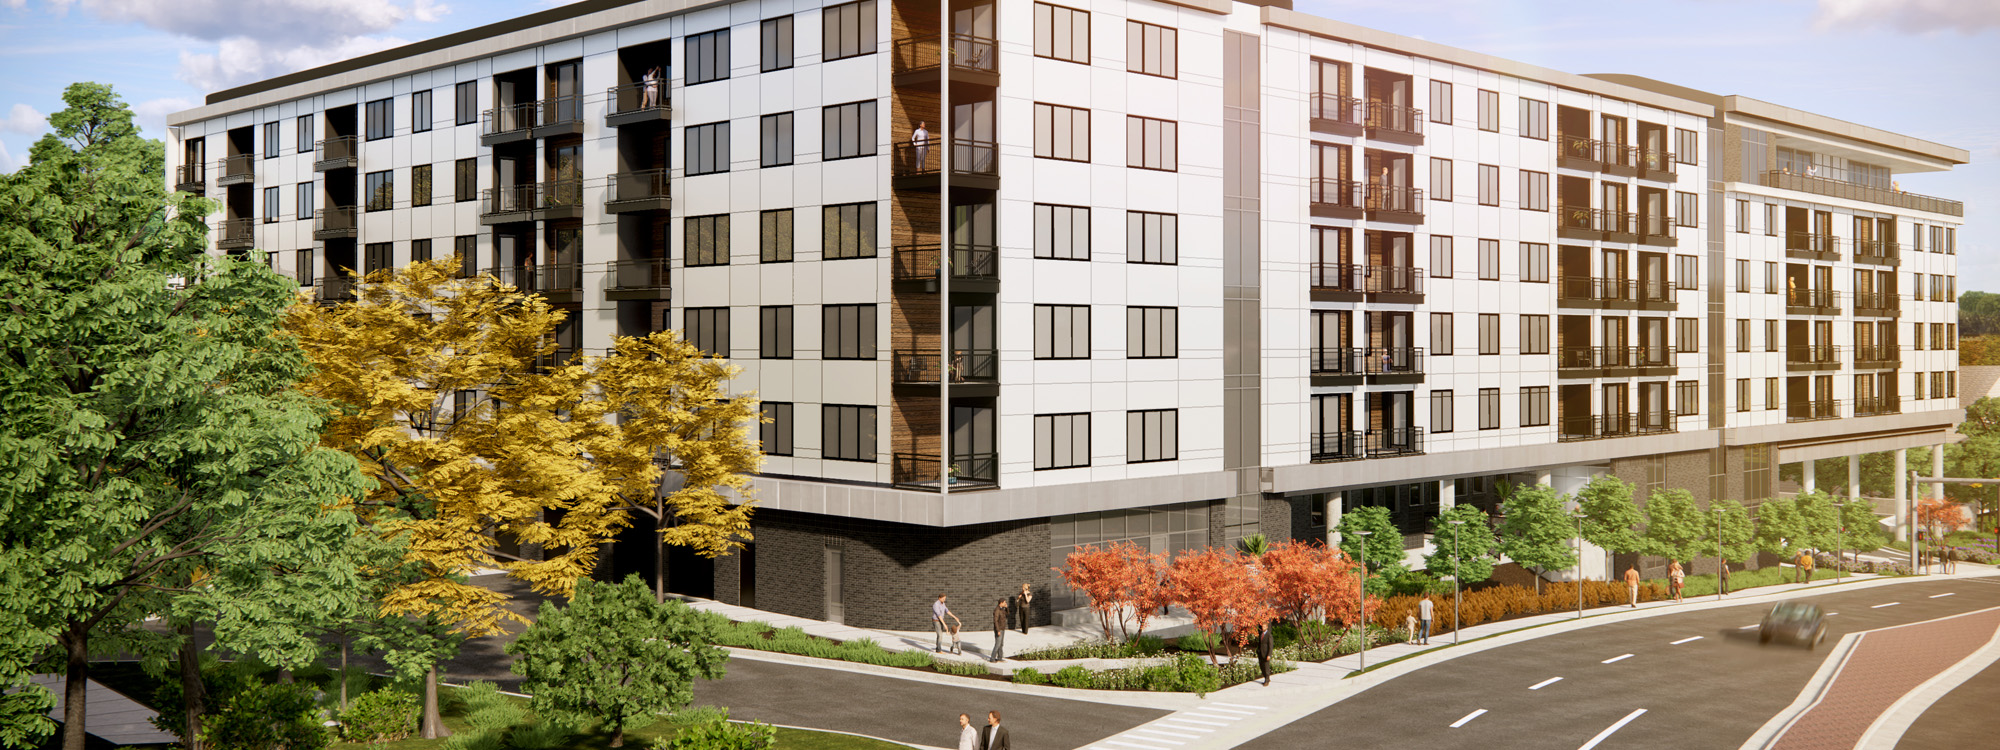 The Hudson, a 228-unit luxury apartment community, will bring high-quality housing and first-class amenities to the Rosedale neighborhood in Kansas City, Kansas.